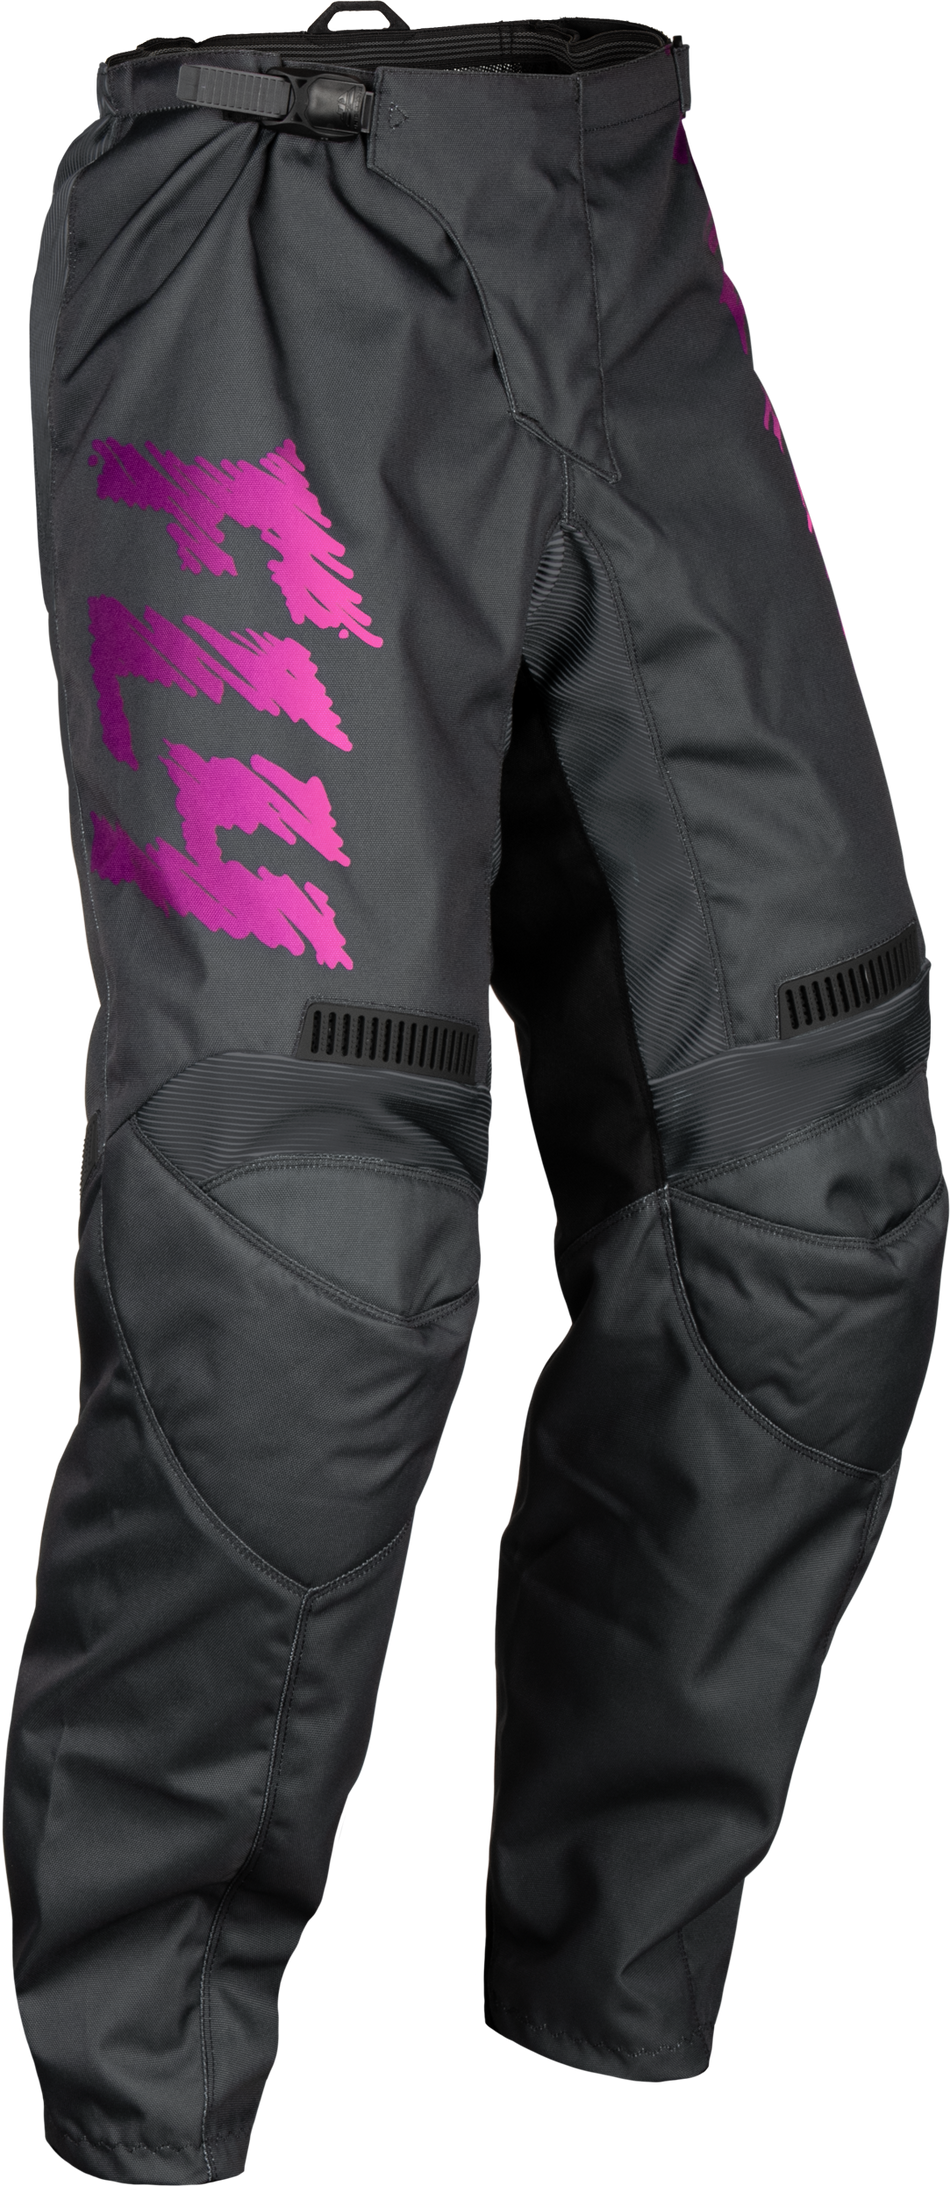 FLY RACING Youth F-16 Pants Grey/Charcoal/Pink Sz 24 377-23024